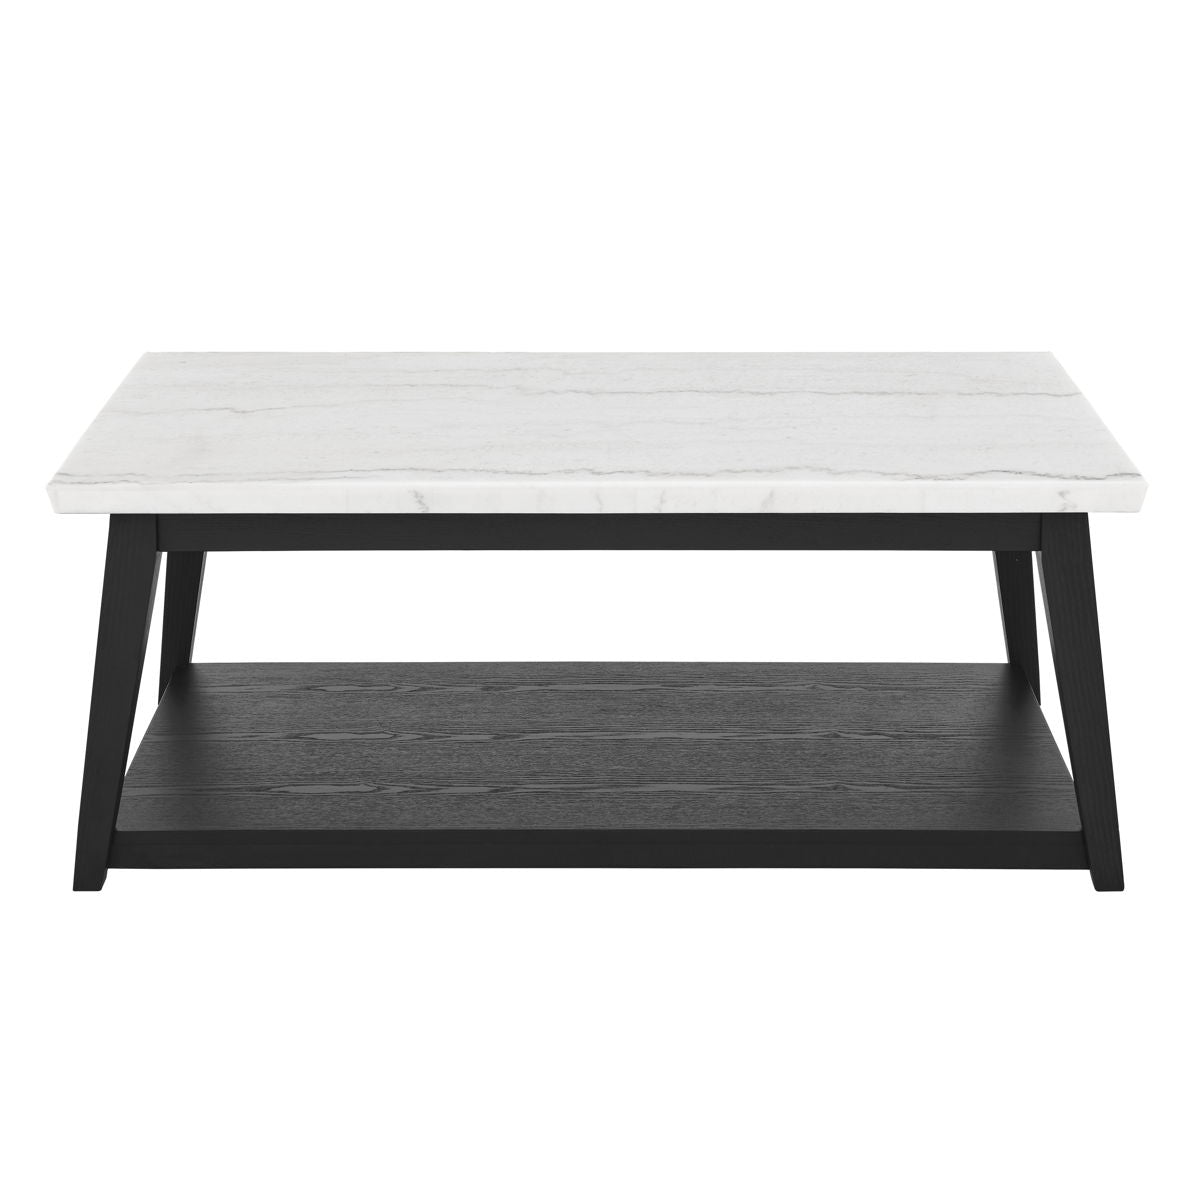 Vida - Marble Cocktail Table With Casters - Black / White